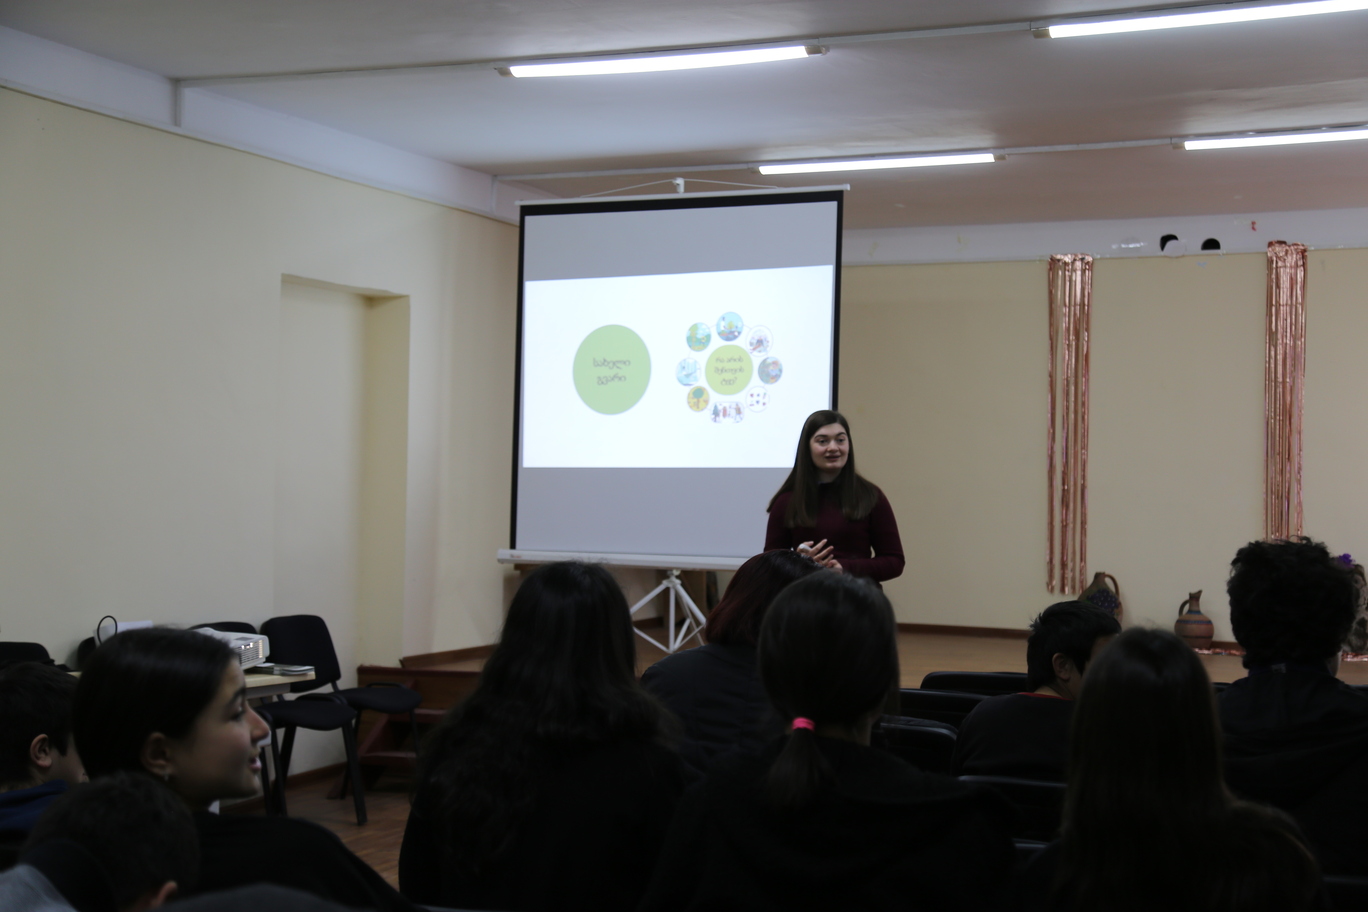 Seminars on sustainable forest management were held for students